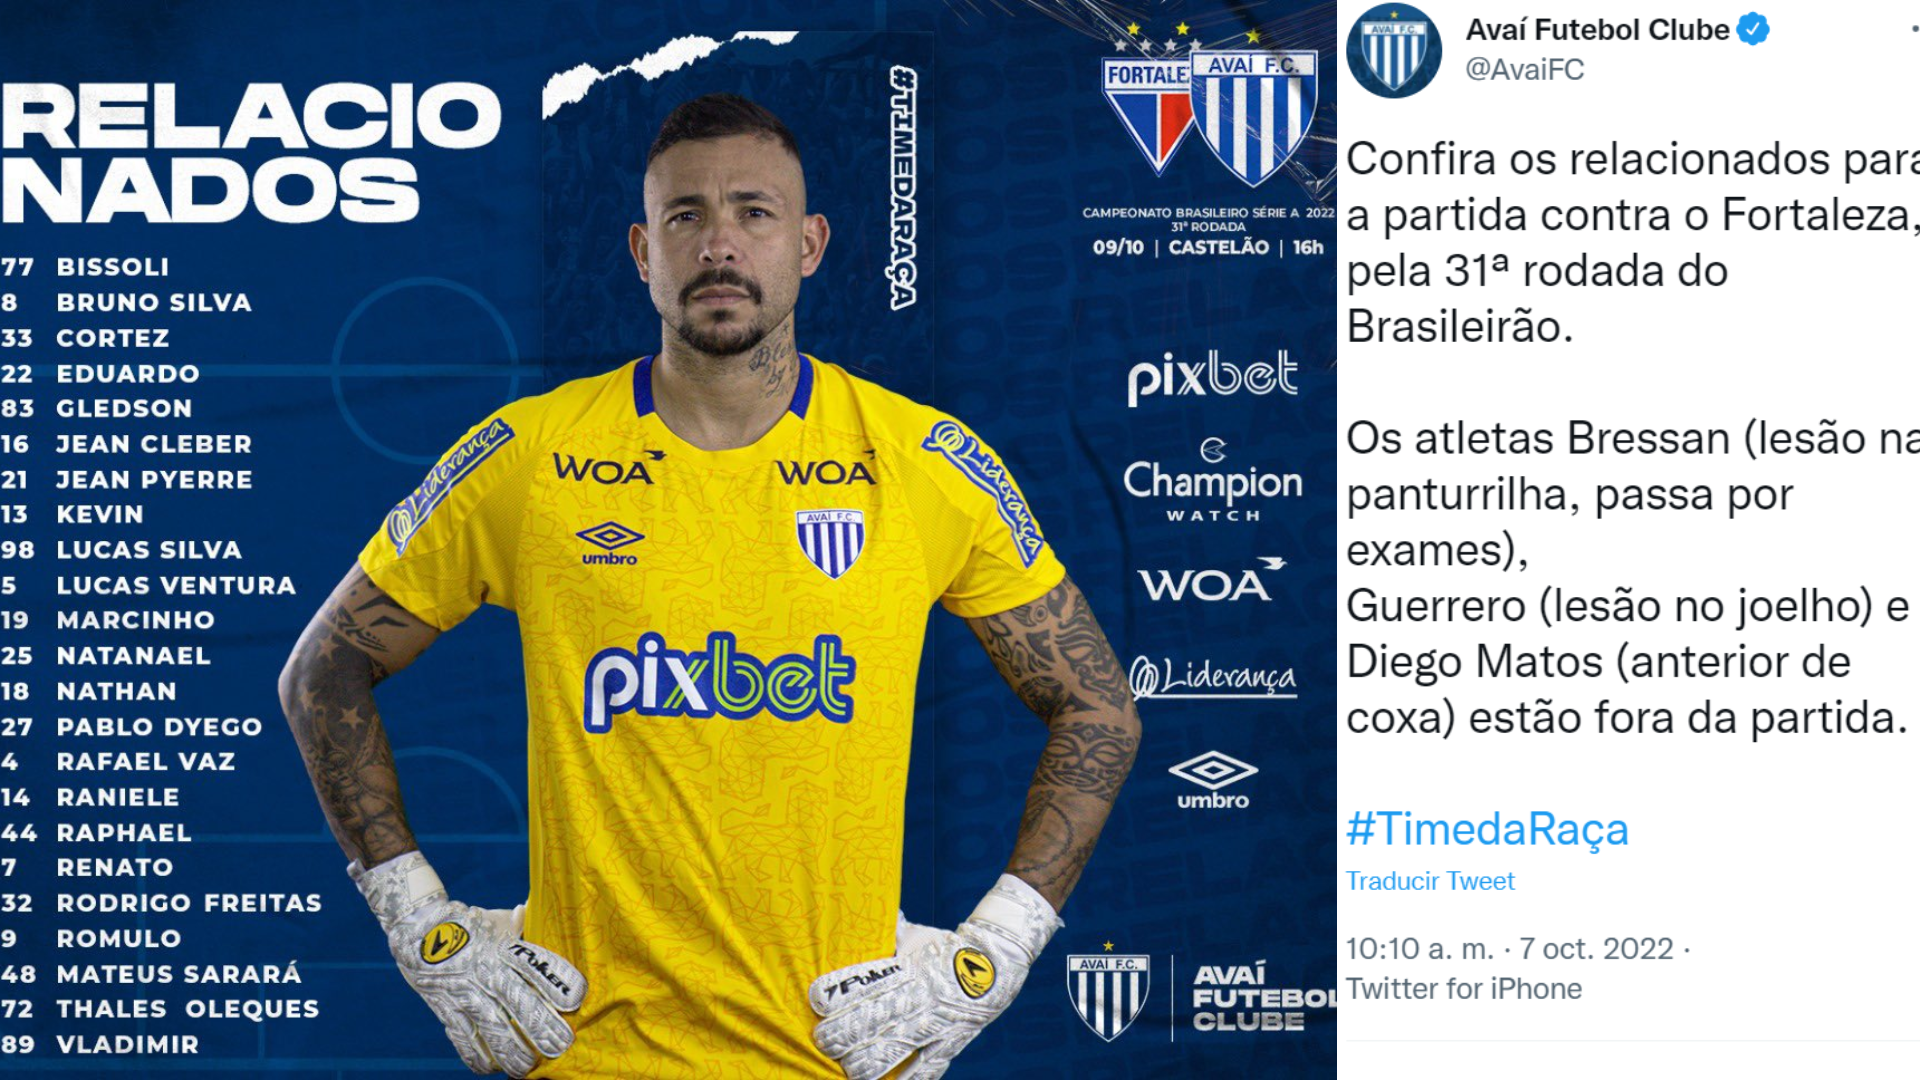 Avaí FC announced that Paolo Guerrero suffered a knee injury.  (Avai FC)